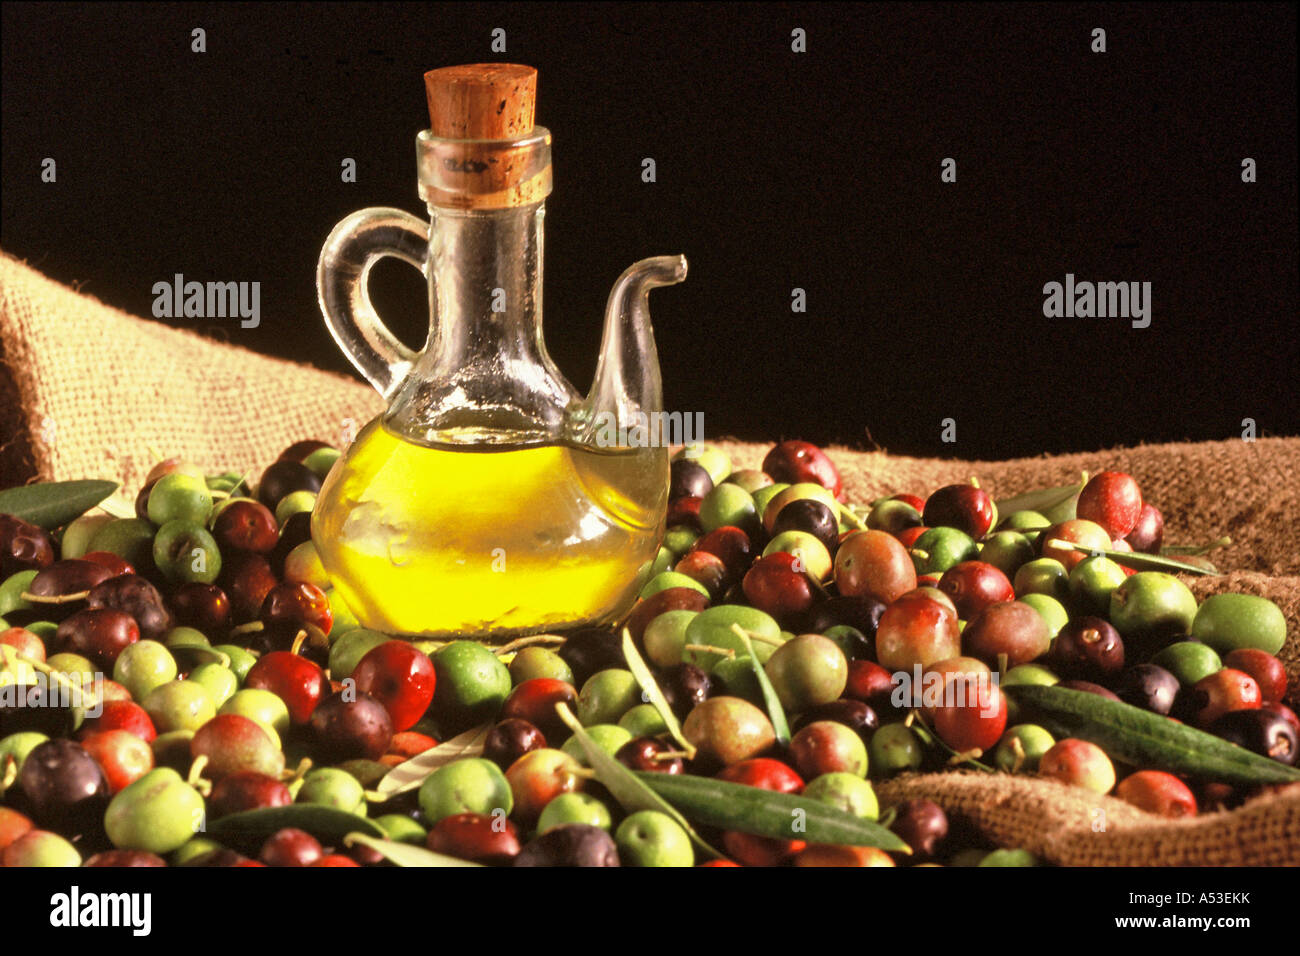 Oil and olives Stock Photo